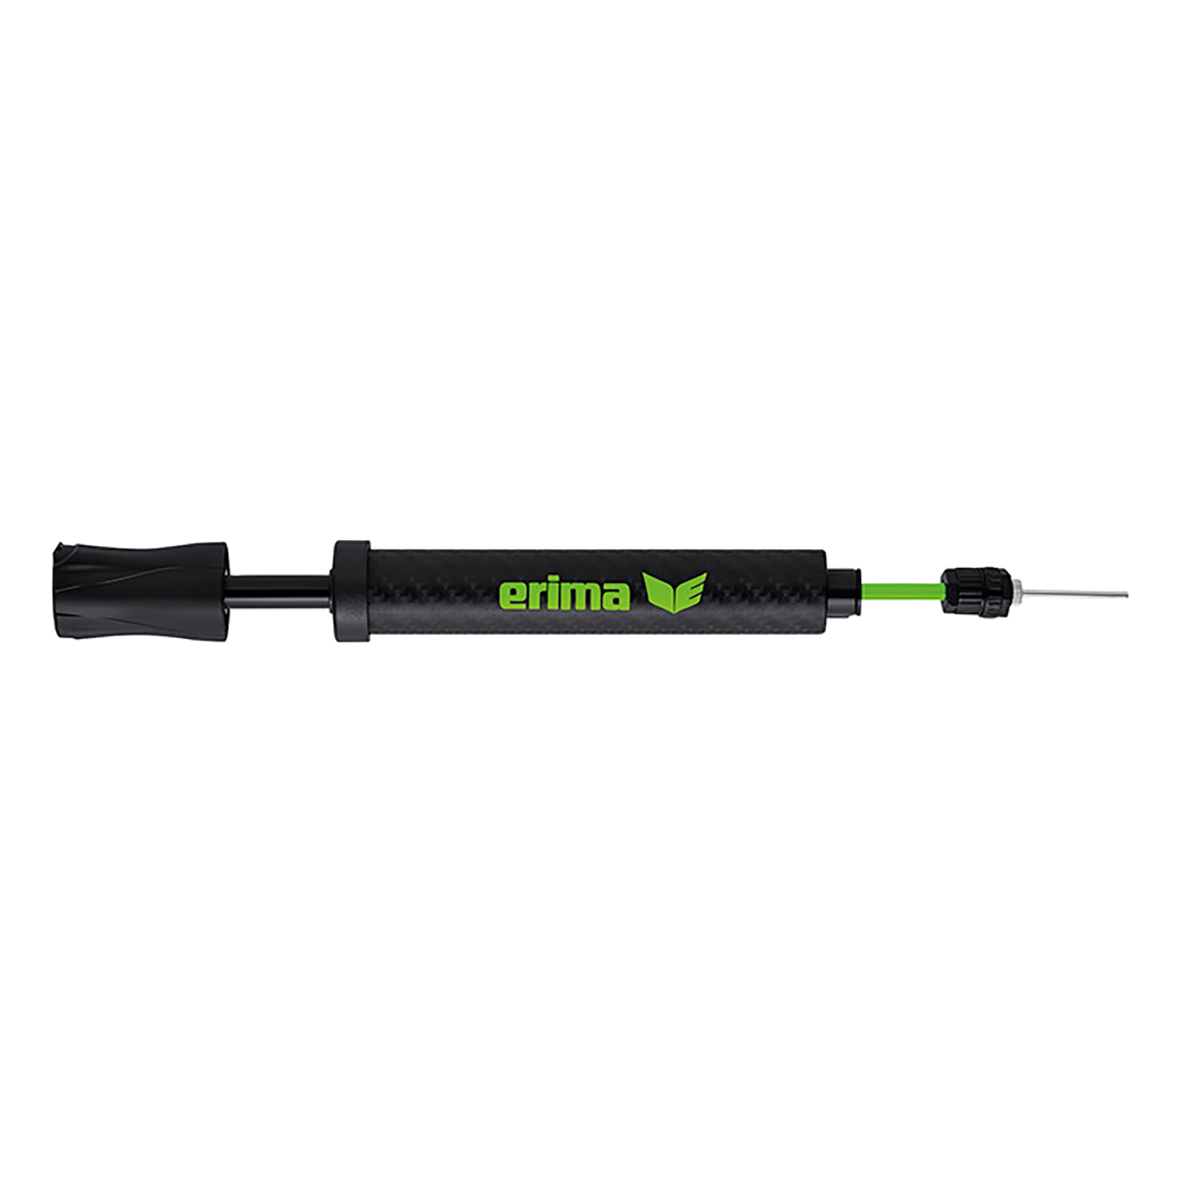 ERIMA 8' AIR PUMP WITH FIXED NEEDLE COMPARTMENT COVER.